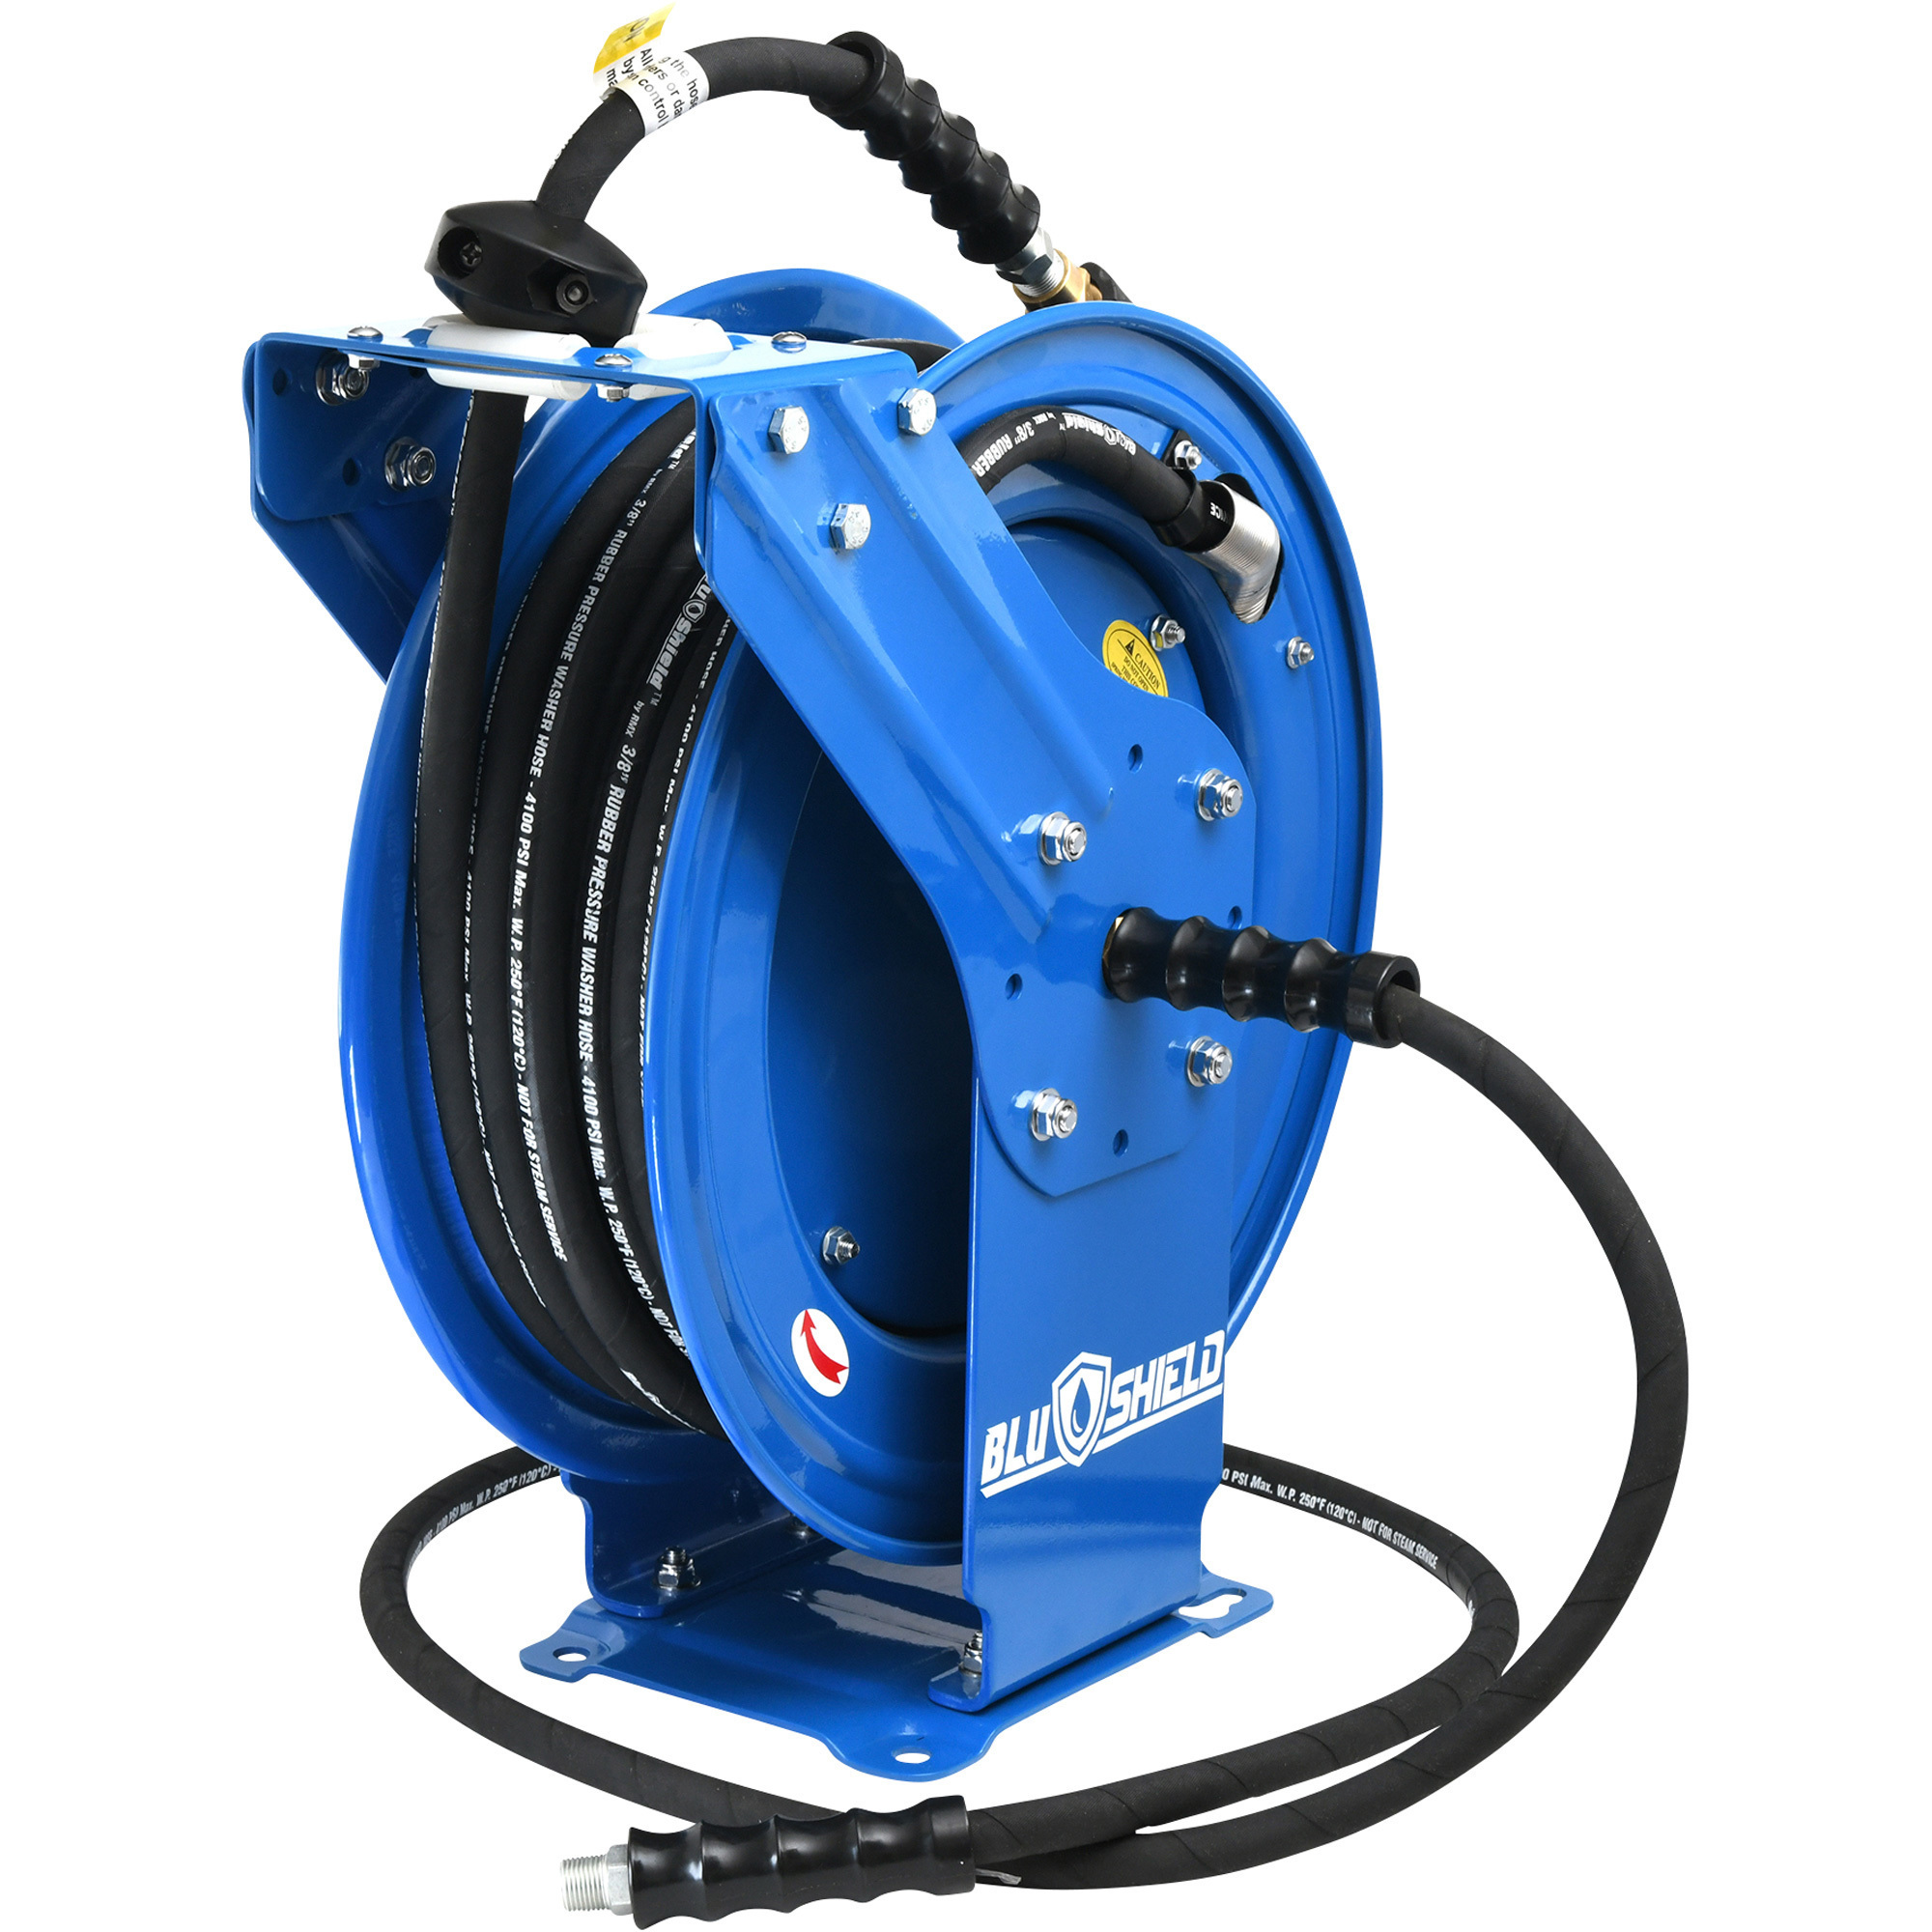 BluShield Retractable Pressure Washer Hose Reel, Includes 3/8in. x